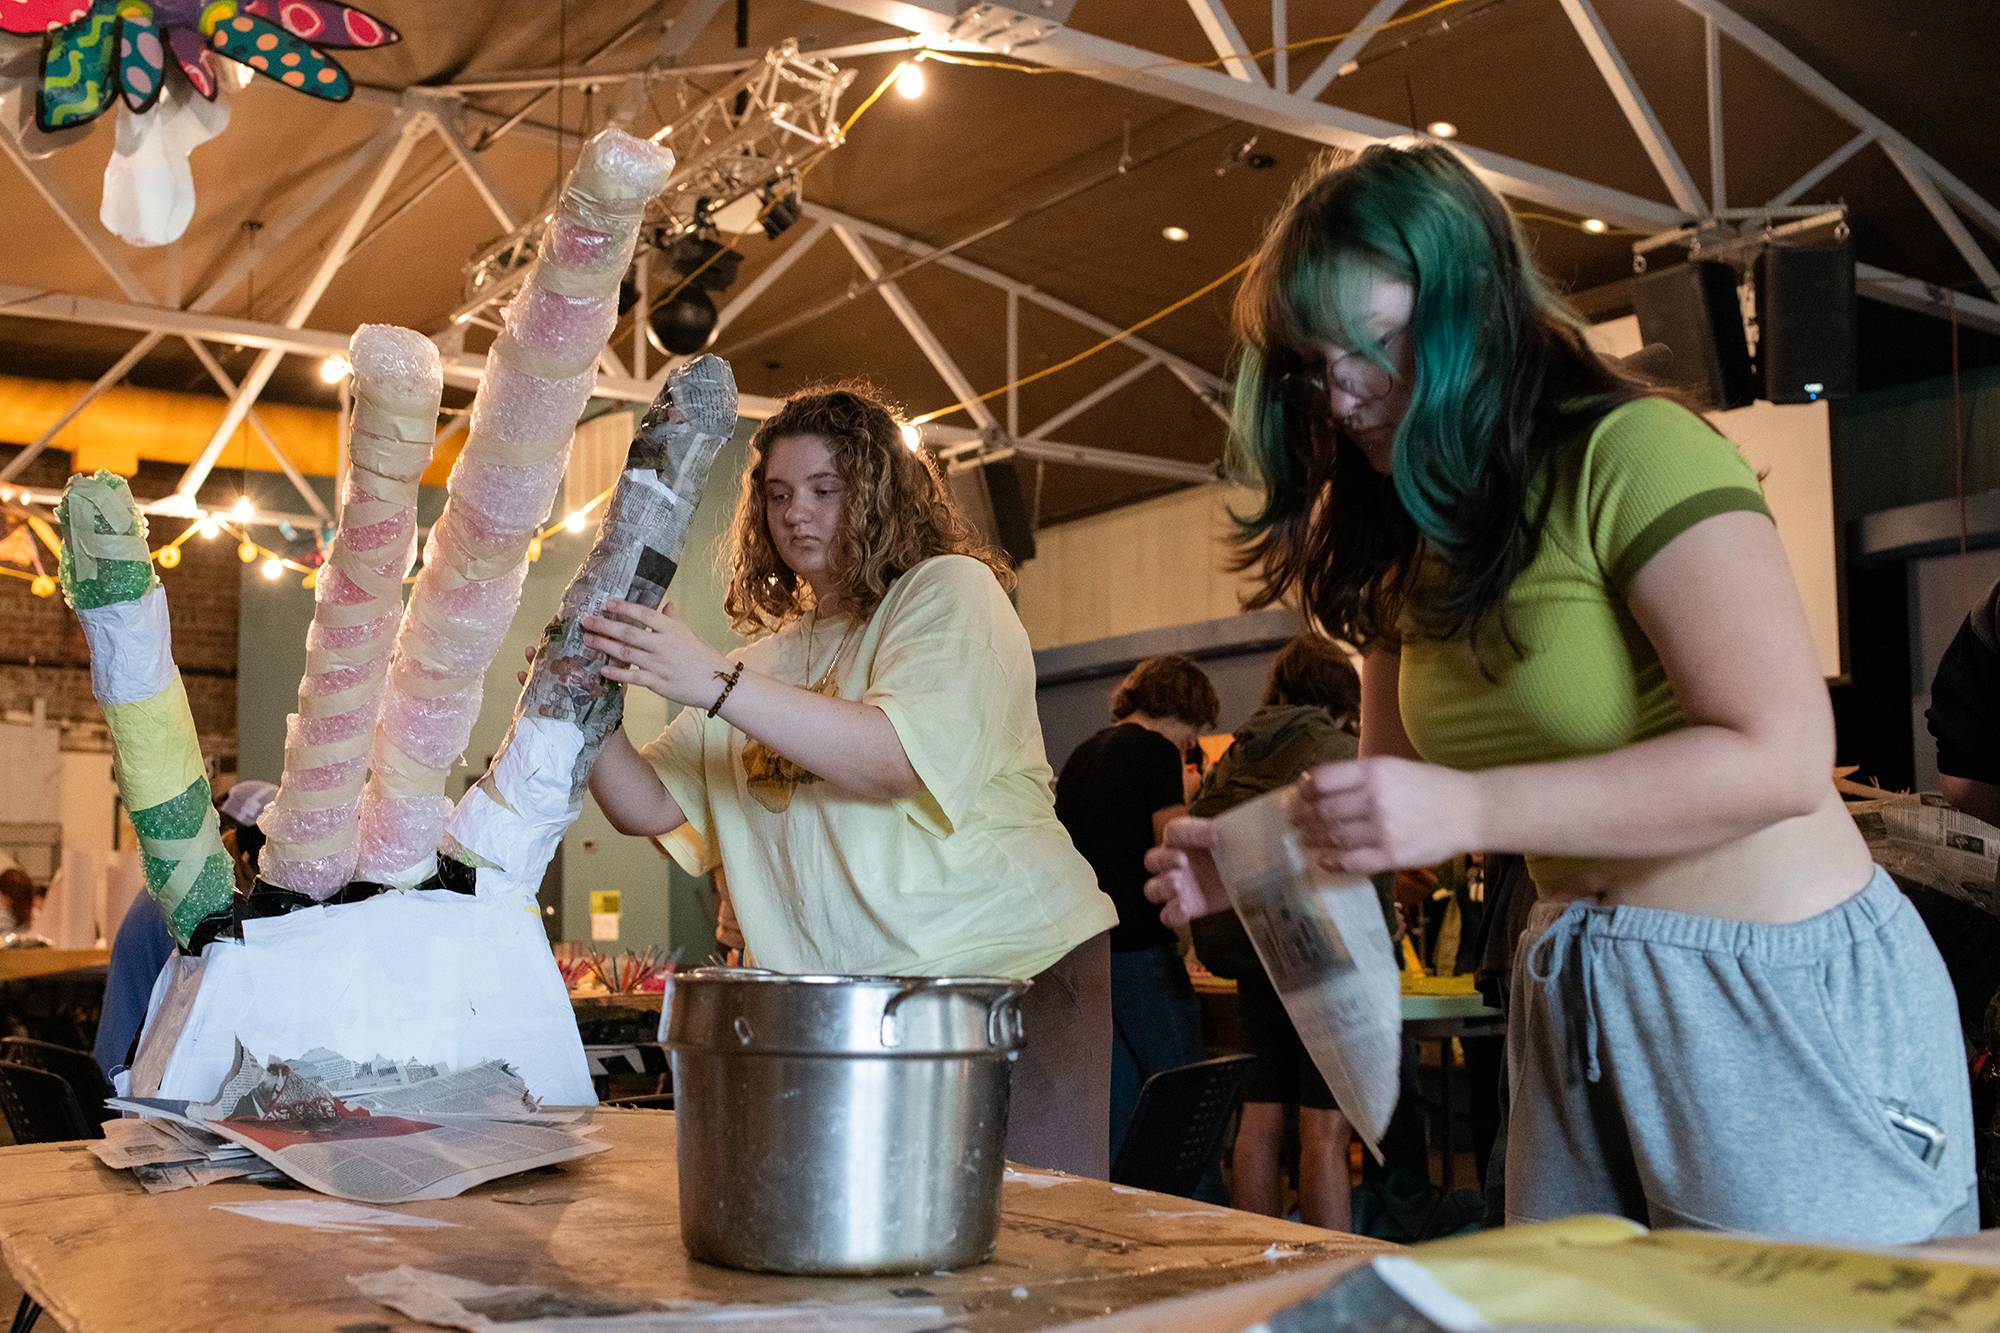 Members of an Ohio University learning community work together at the Central Venue to create paper mache pieces for a costume to be worn in the Passion Works Honey For The Heart Parade in Athens, Ohio.